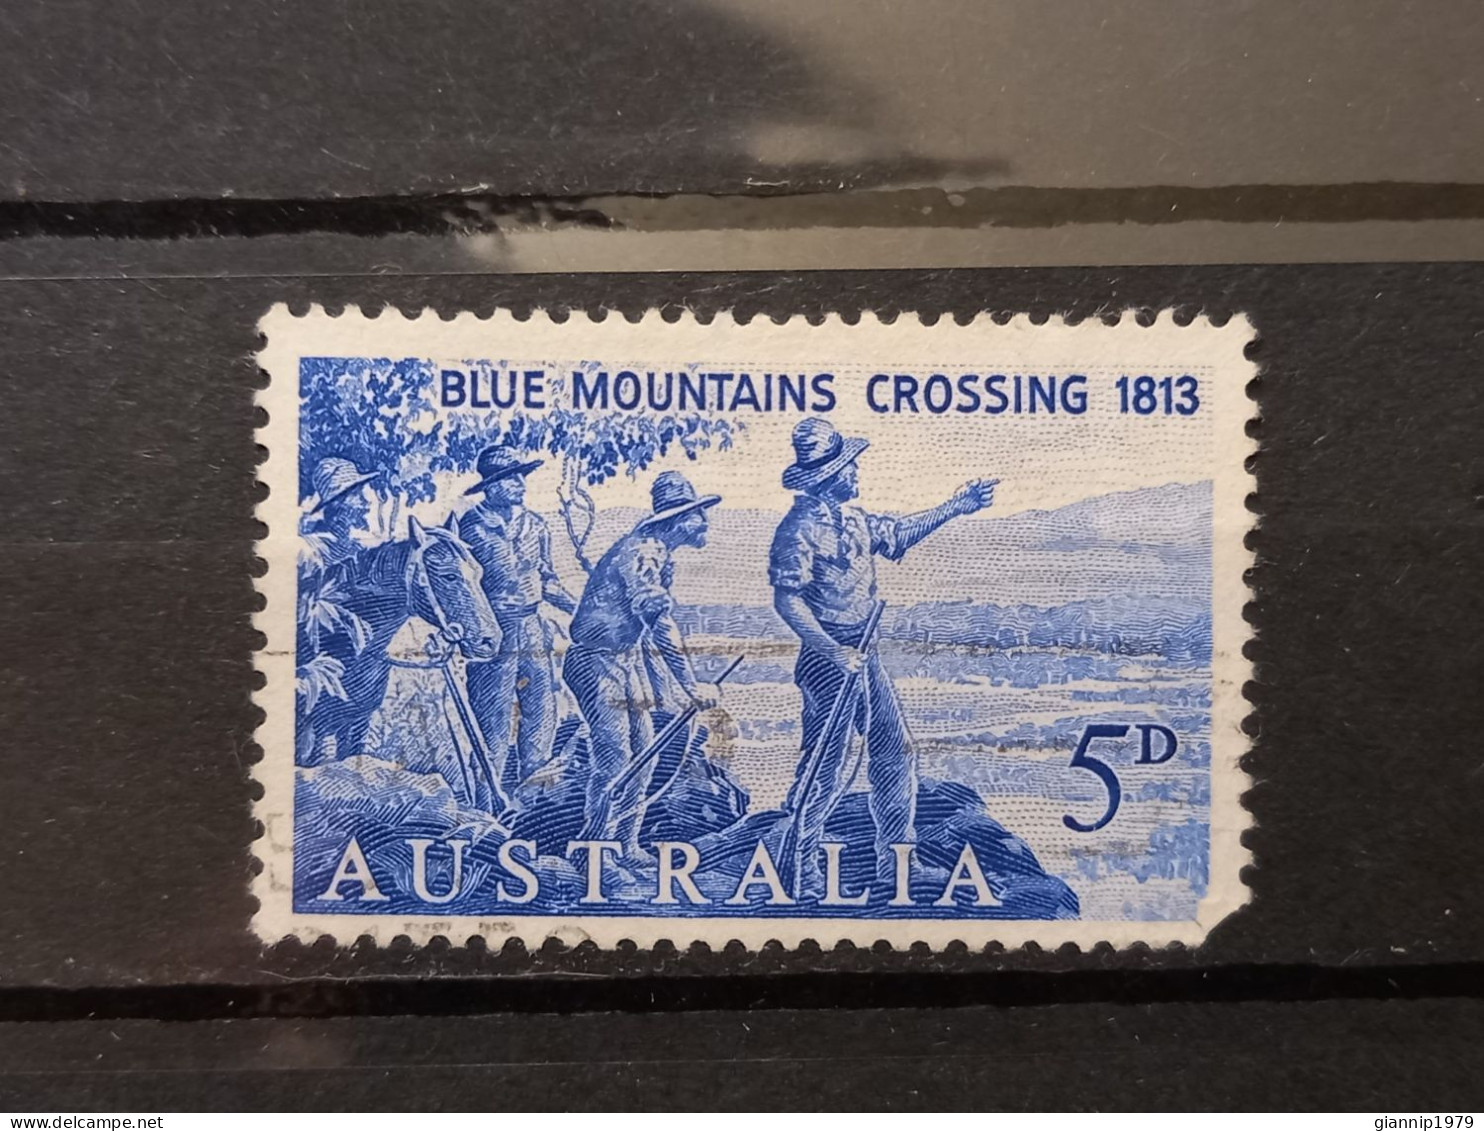 FRANCOBOLLI STAMPS AUSTRALIA AUSTRALIAN 1963 USED 150 ANNI ANNIVERSARY BLUE MOUNTAINS OBLITERE' - Used Stamps